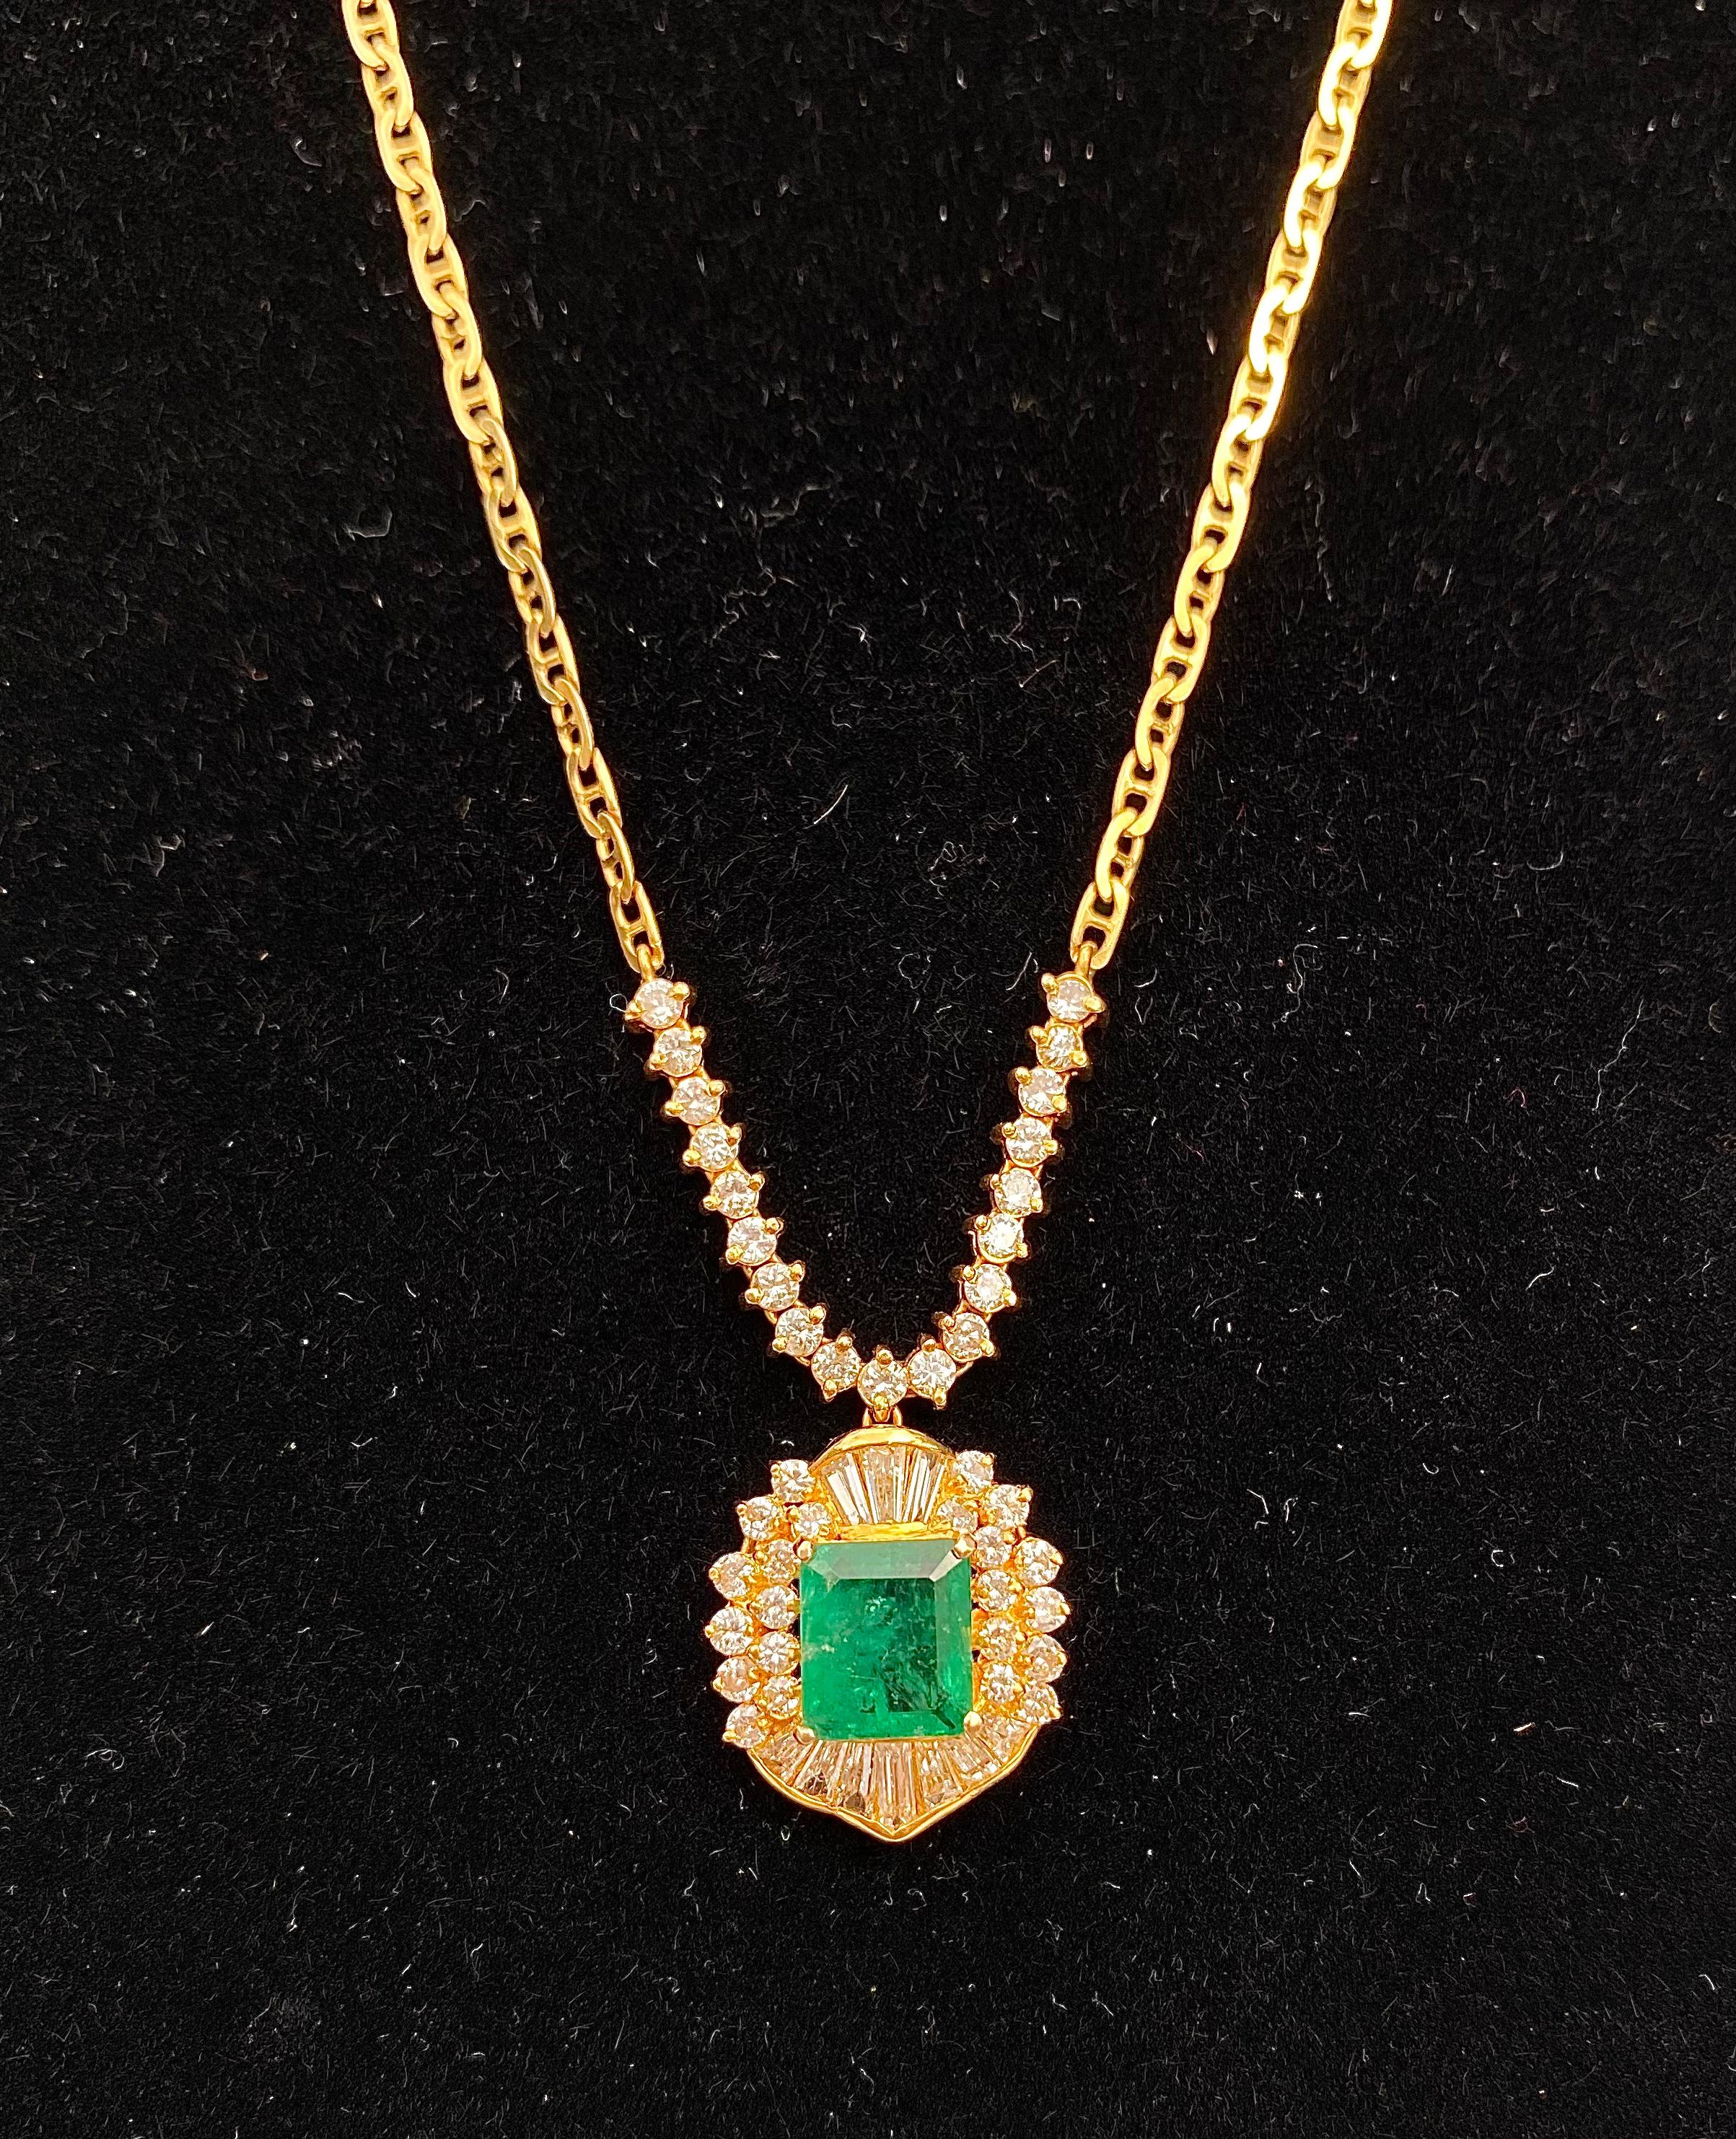 Centering a 1.33 Carat Emerald-Cut Colombian Emerald, accented and framed by 0.48 Carats of Round-Brilliant Cut Diamonds, and set in 18K Yellow Gold– also a part of a lovely Emerald Set!

Details:
✔ Stone: Emerald
✔ Center-Stone Weight: 1.33